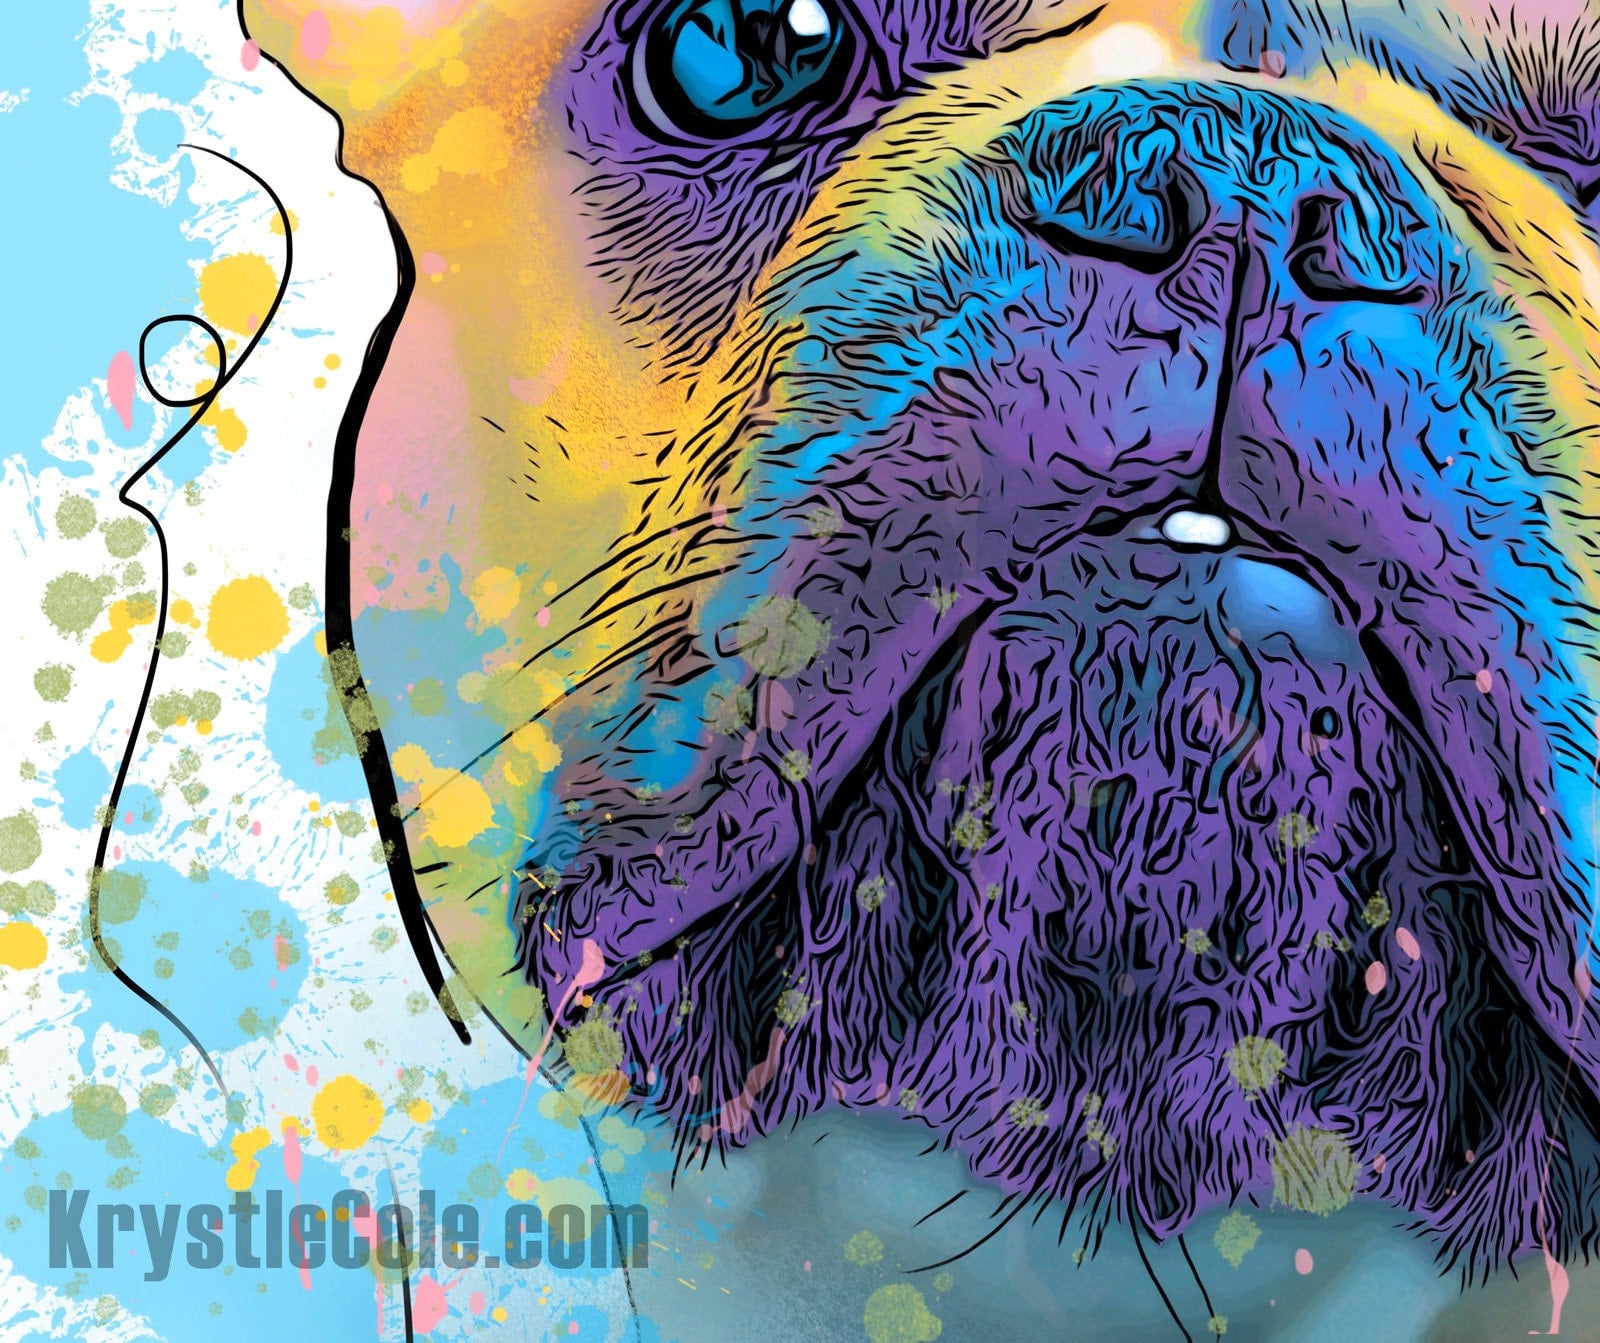 French Bulldog Art Print on CANVAS or PAPER - Frenchie Art. Original Artwork by Krystle Cole *Each Print Hand Signed*